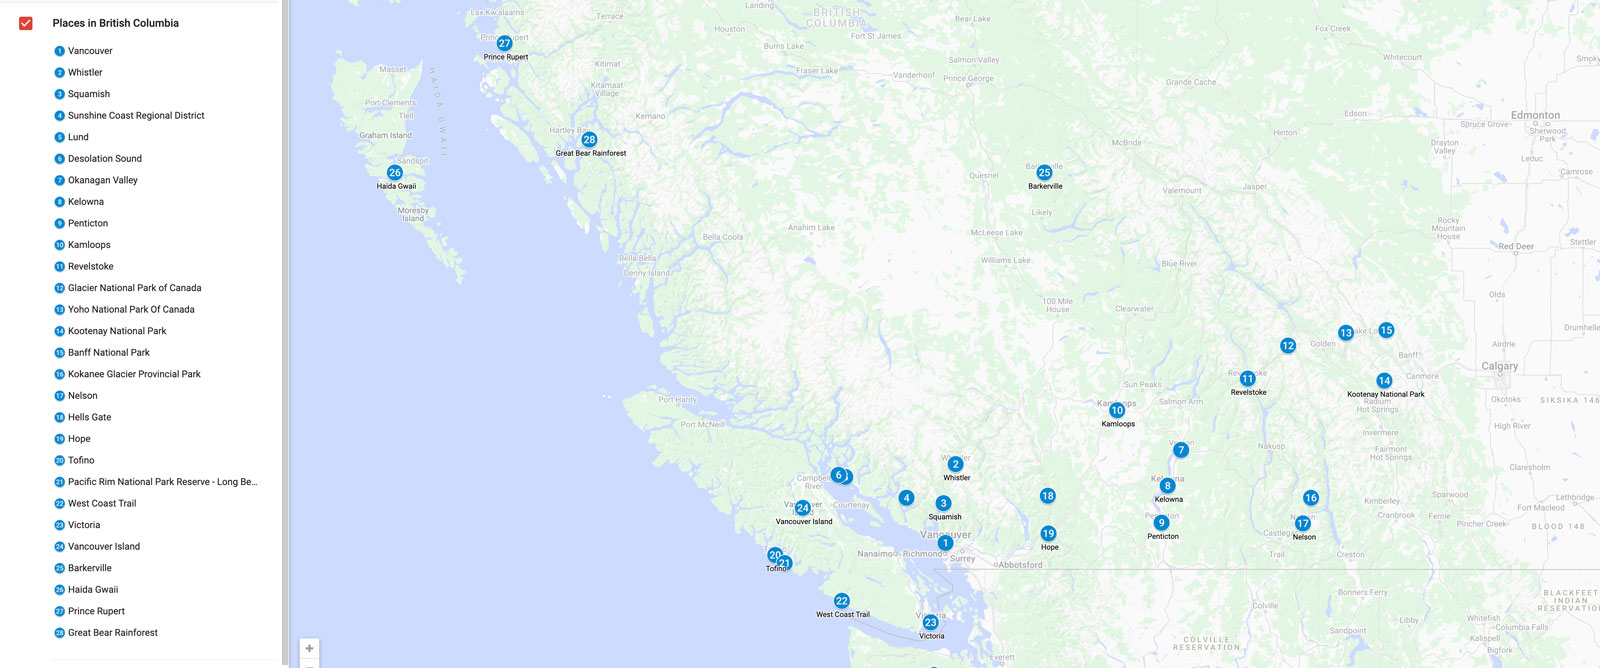 best places to visit in british columbia map